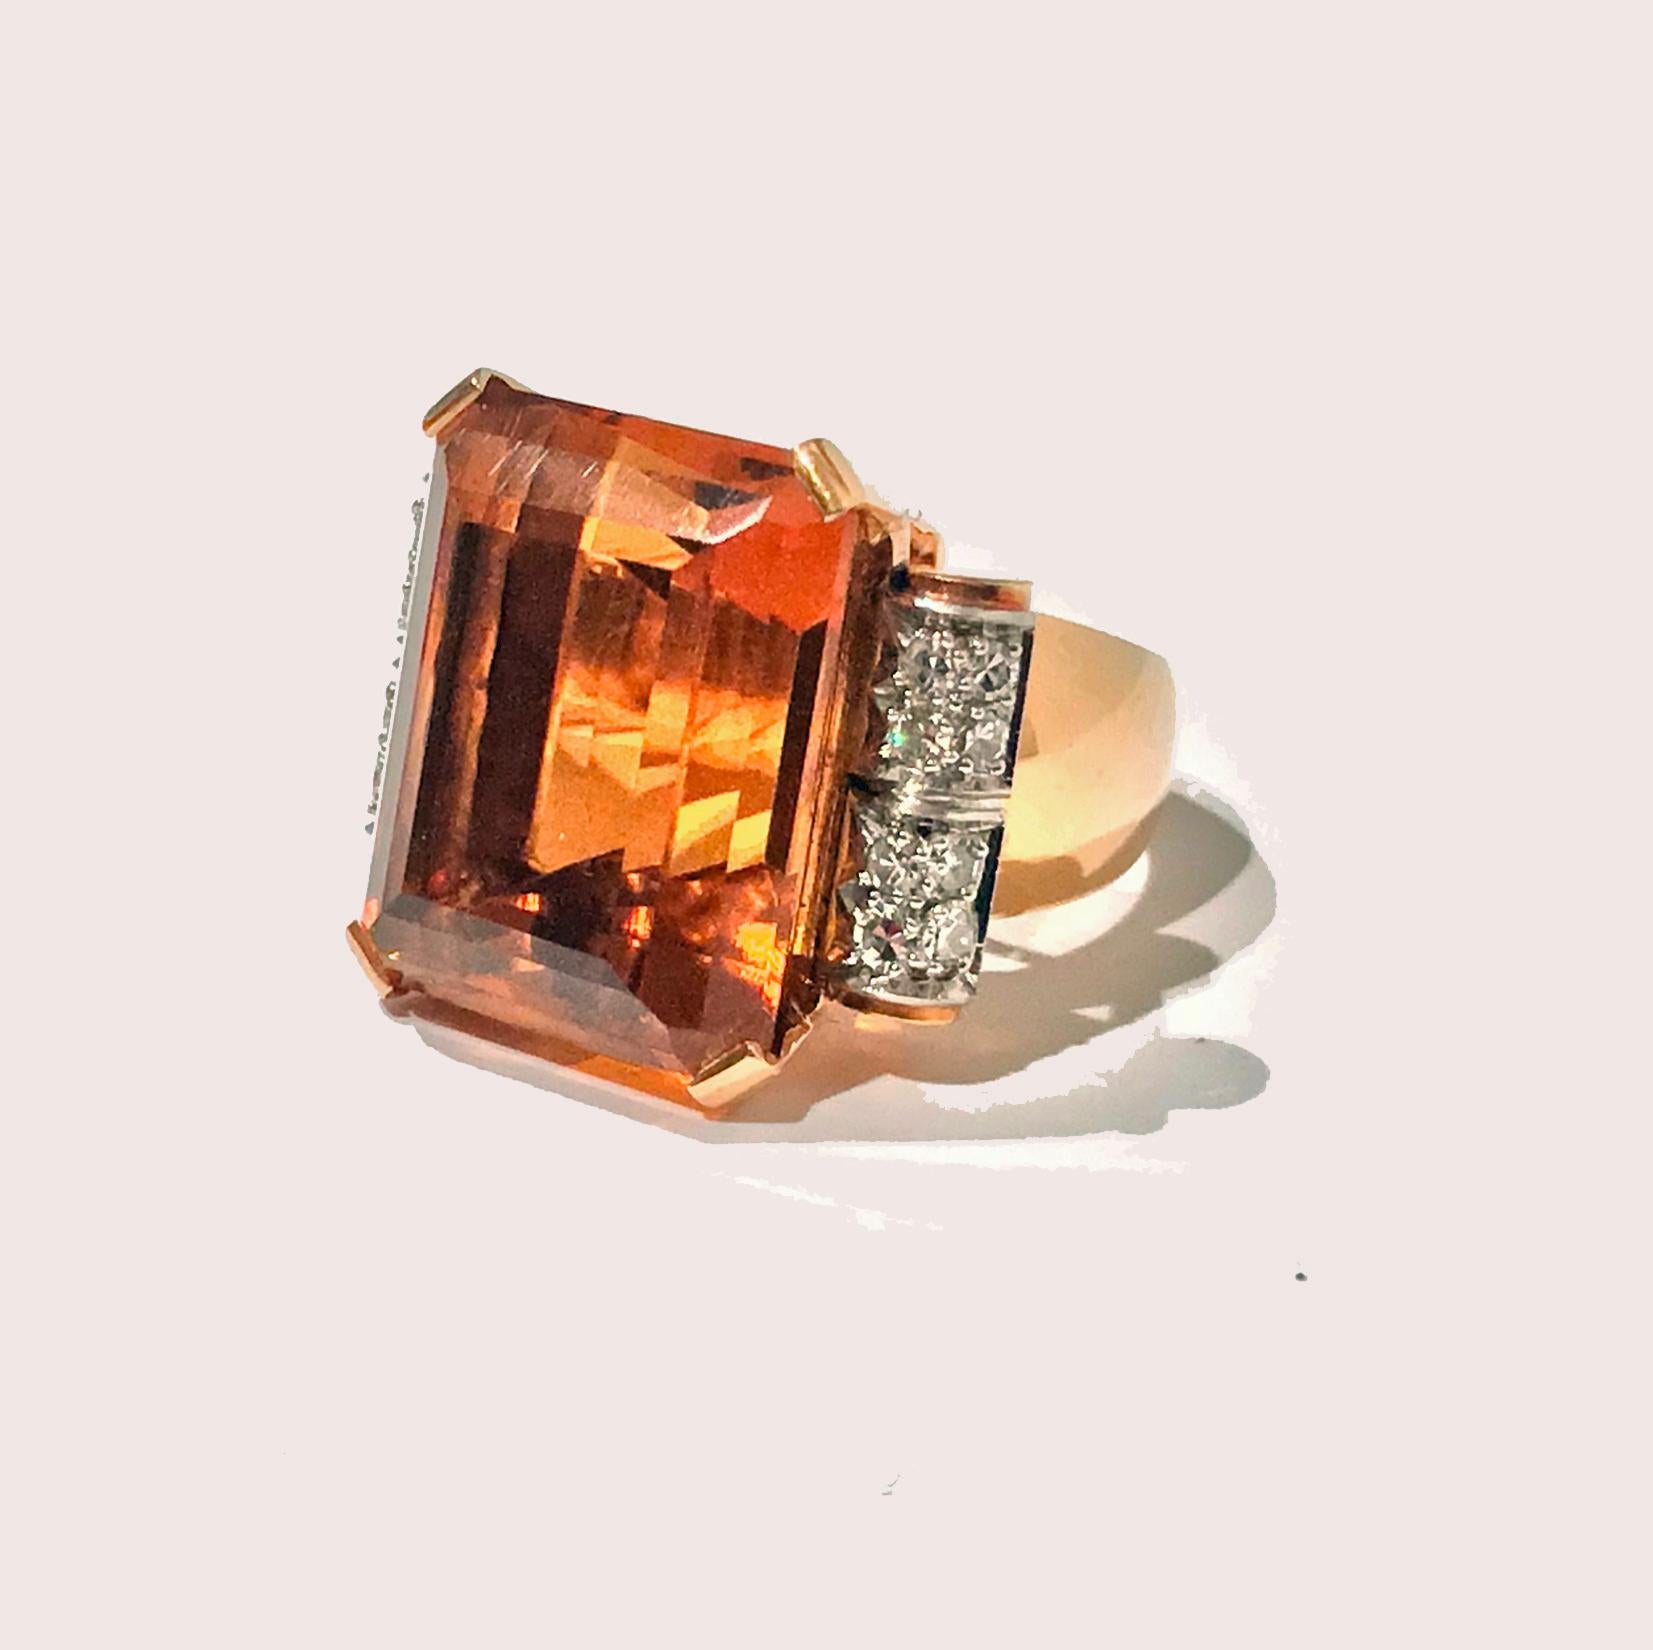 18K Citrine and Diamond Ring, French owl import mark, 20th century. The ring set with a large deep sherry orange rectangular step cut citrine, gauging approximately 20 x 18 x 12 mm, flanked on each side with eight single cut diamonds surmounted on